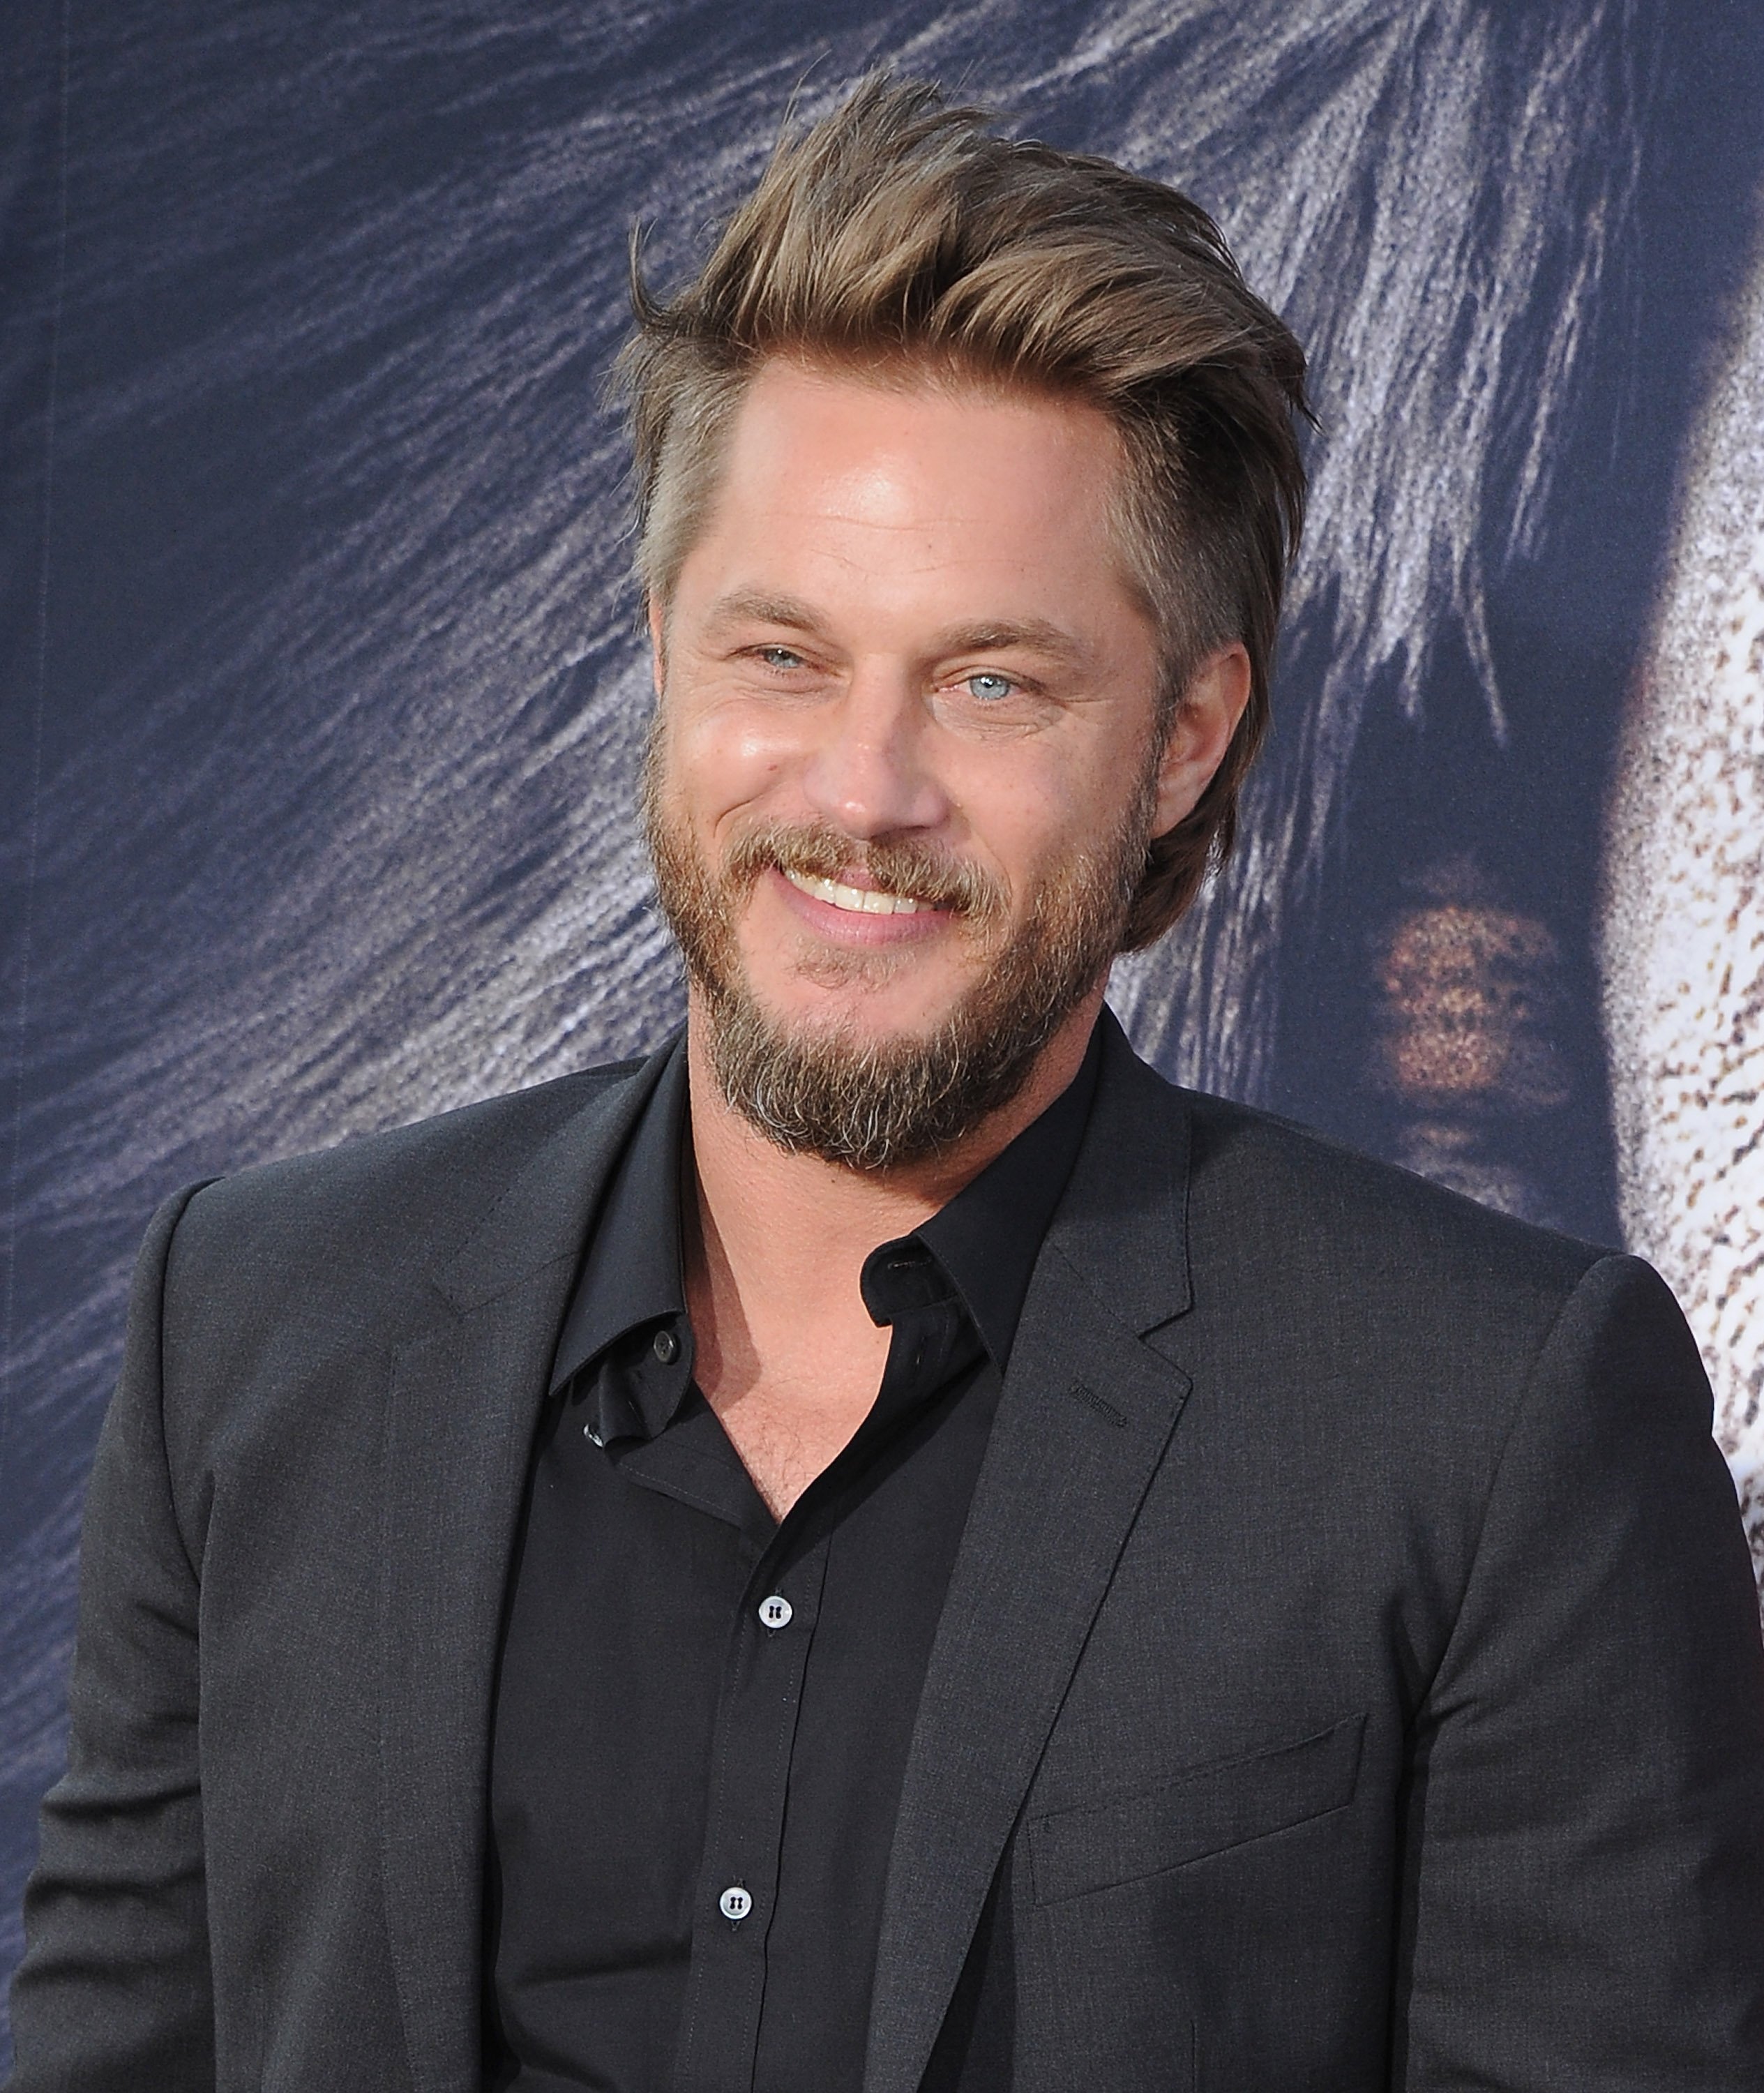 Actor Travis Fimmel arrives at the Los Angeles Premiere "Warcraft" at TCL Chinese Theatre IMAX on June 6, 2016 in Hollywood, California. | Photo: Getty Images